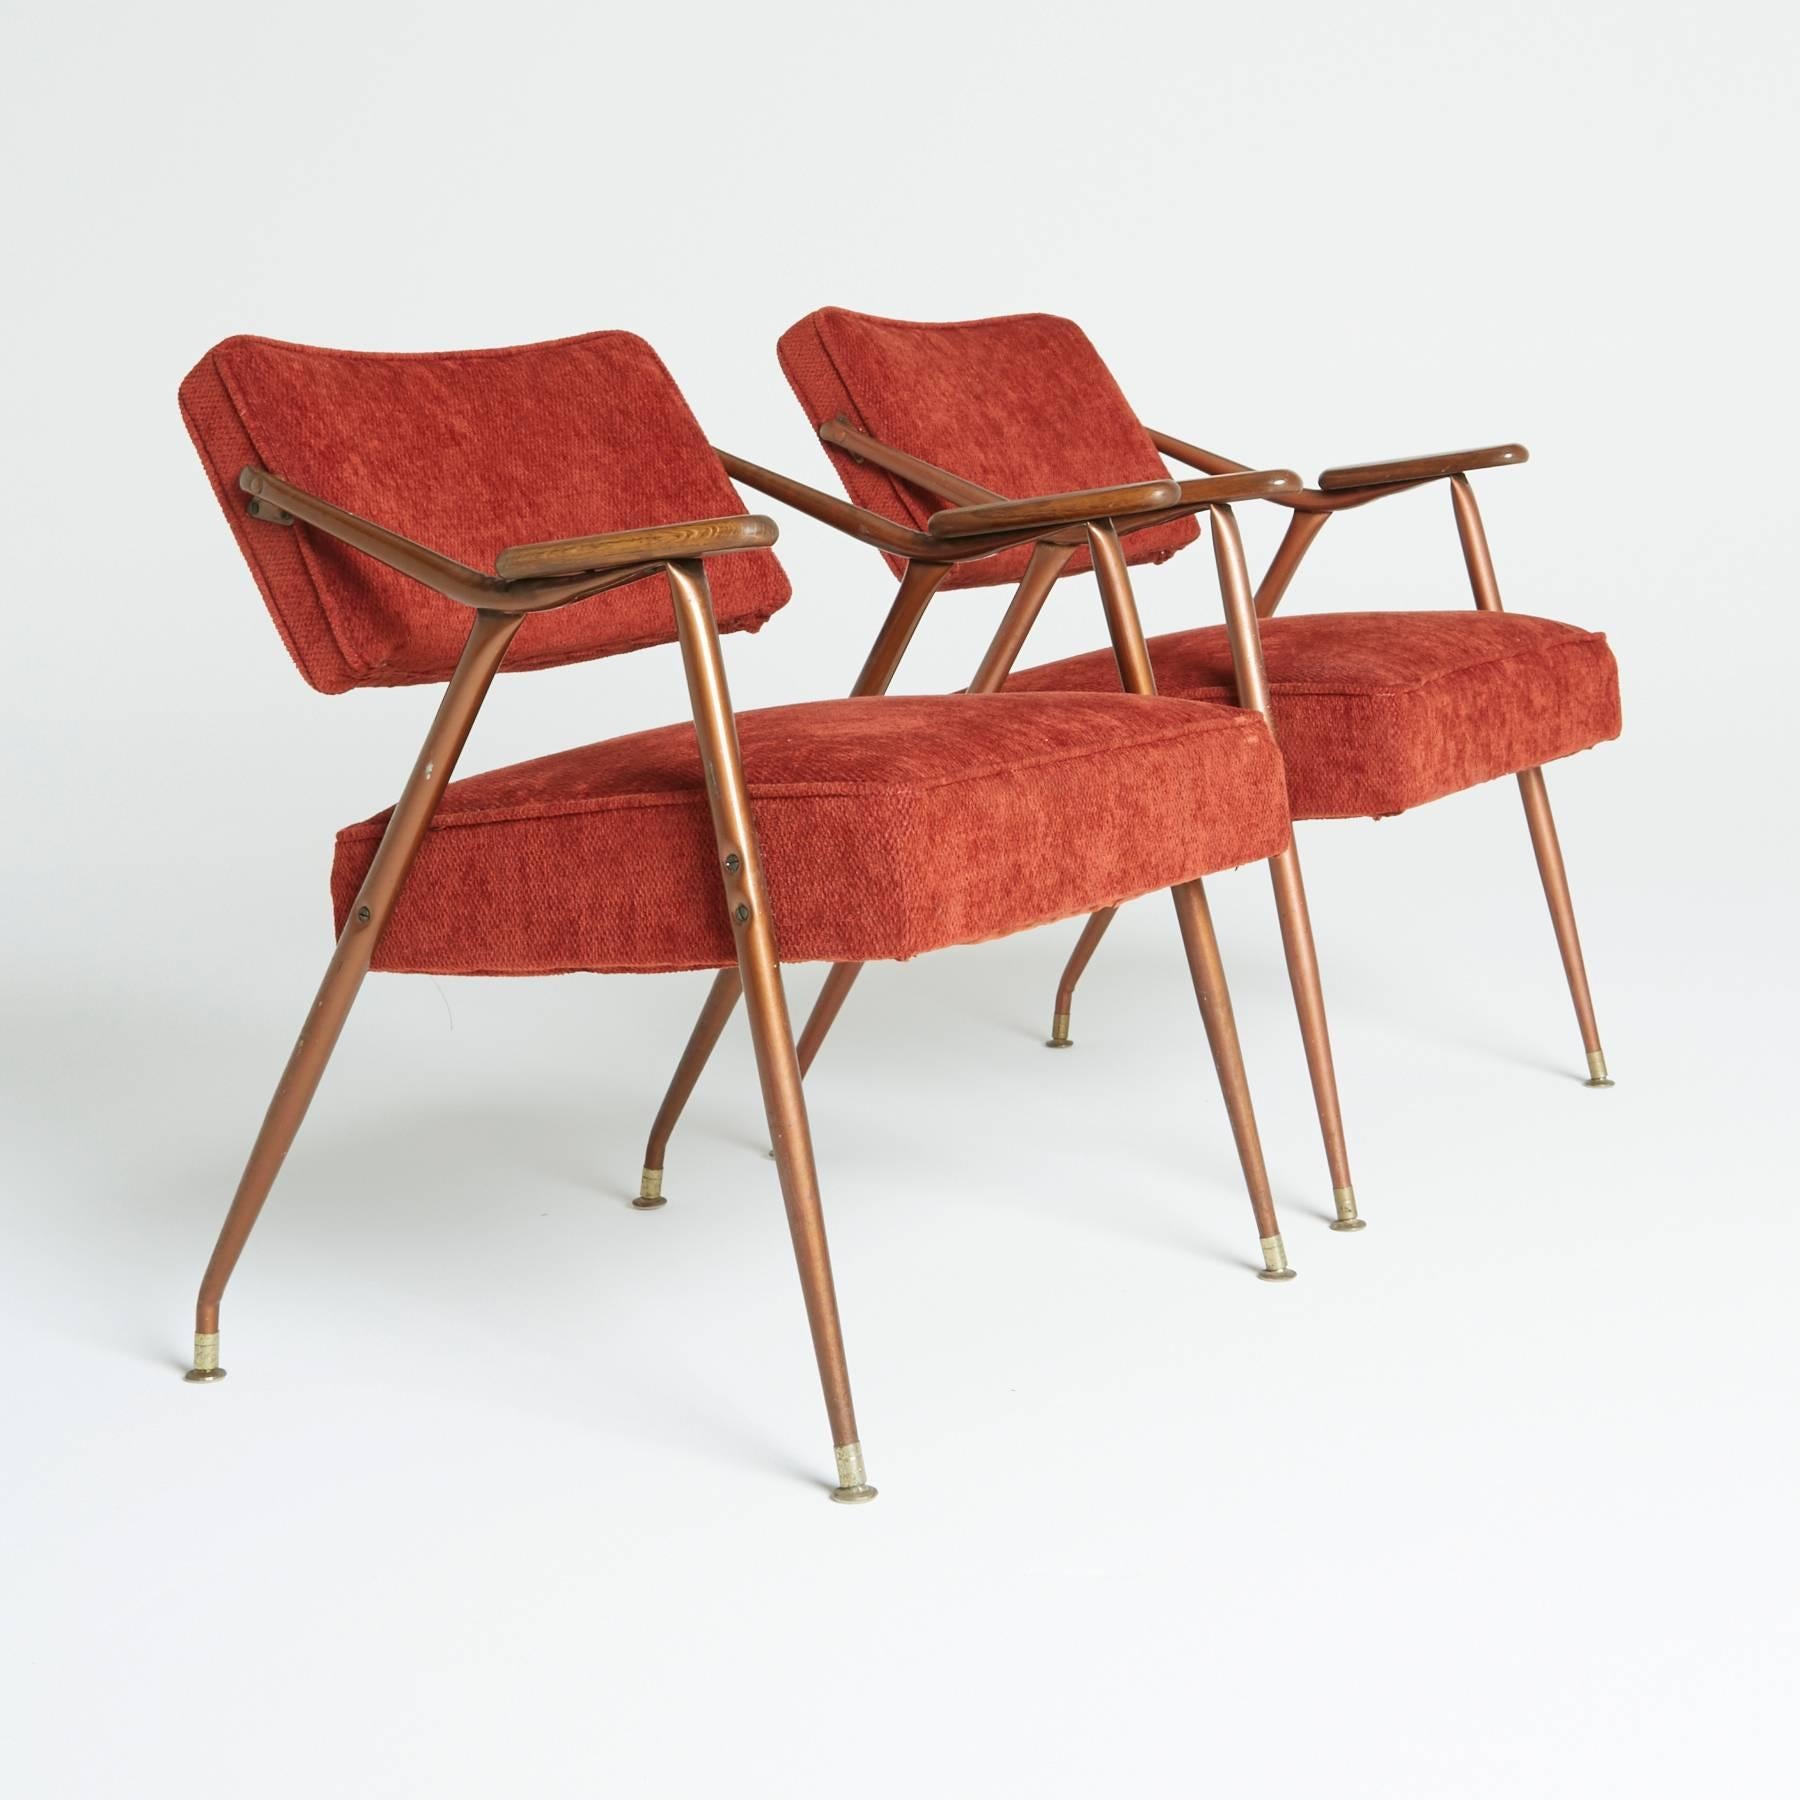 These Mid-Century armchairs have the lean of a lounge chair and the poise to command attention. Slanted tubular metal frames have wooden arm rests and are capped with Classic sliders at the feet. The deep red chenille upholstery has a dynamic sheen